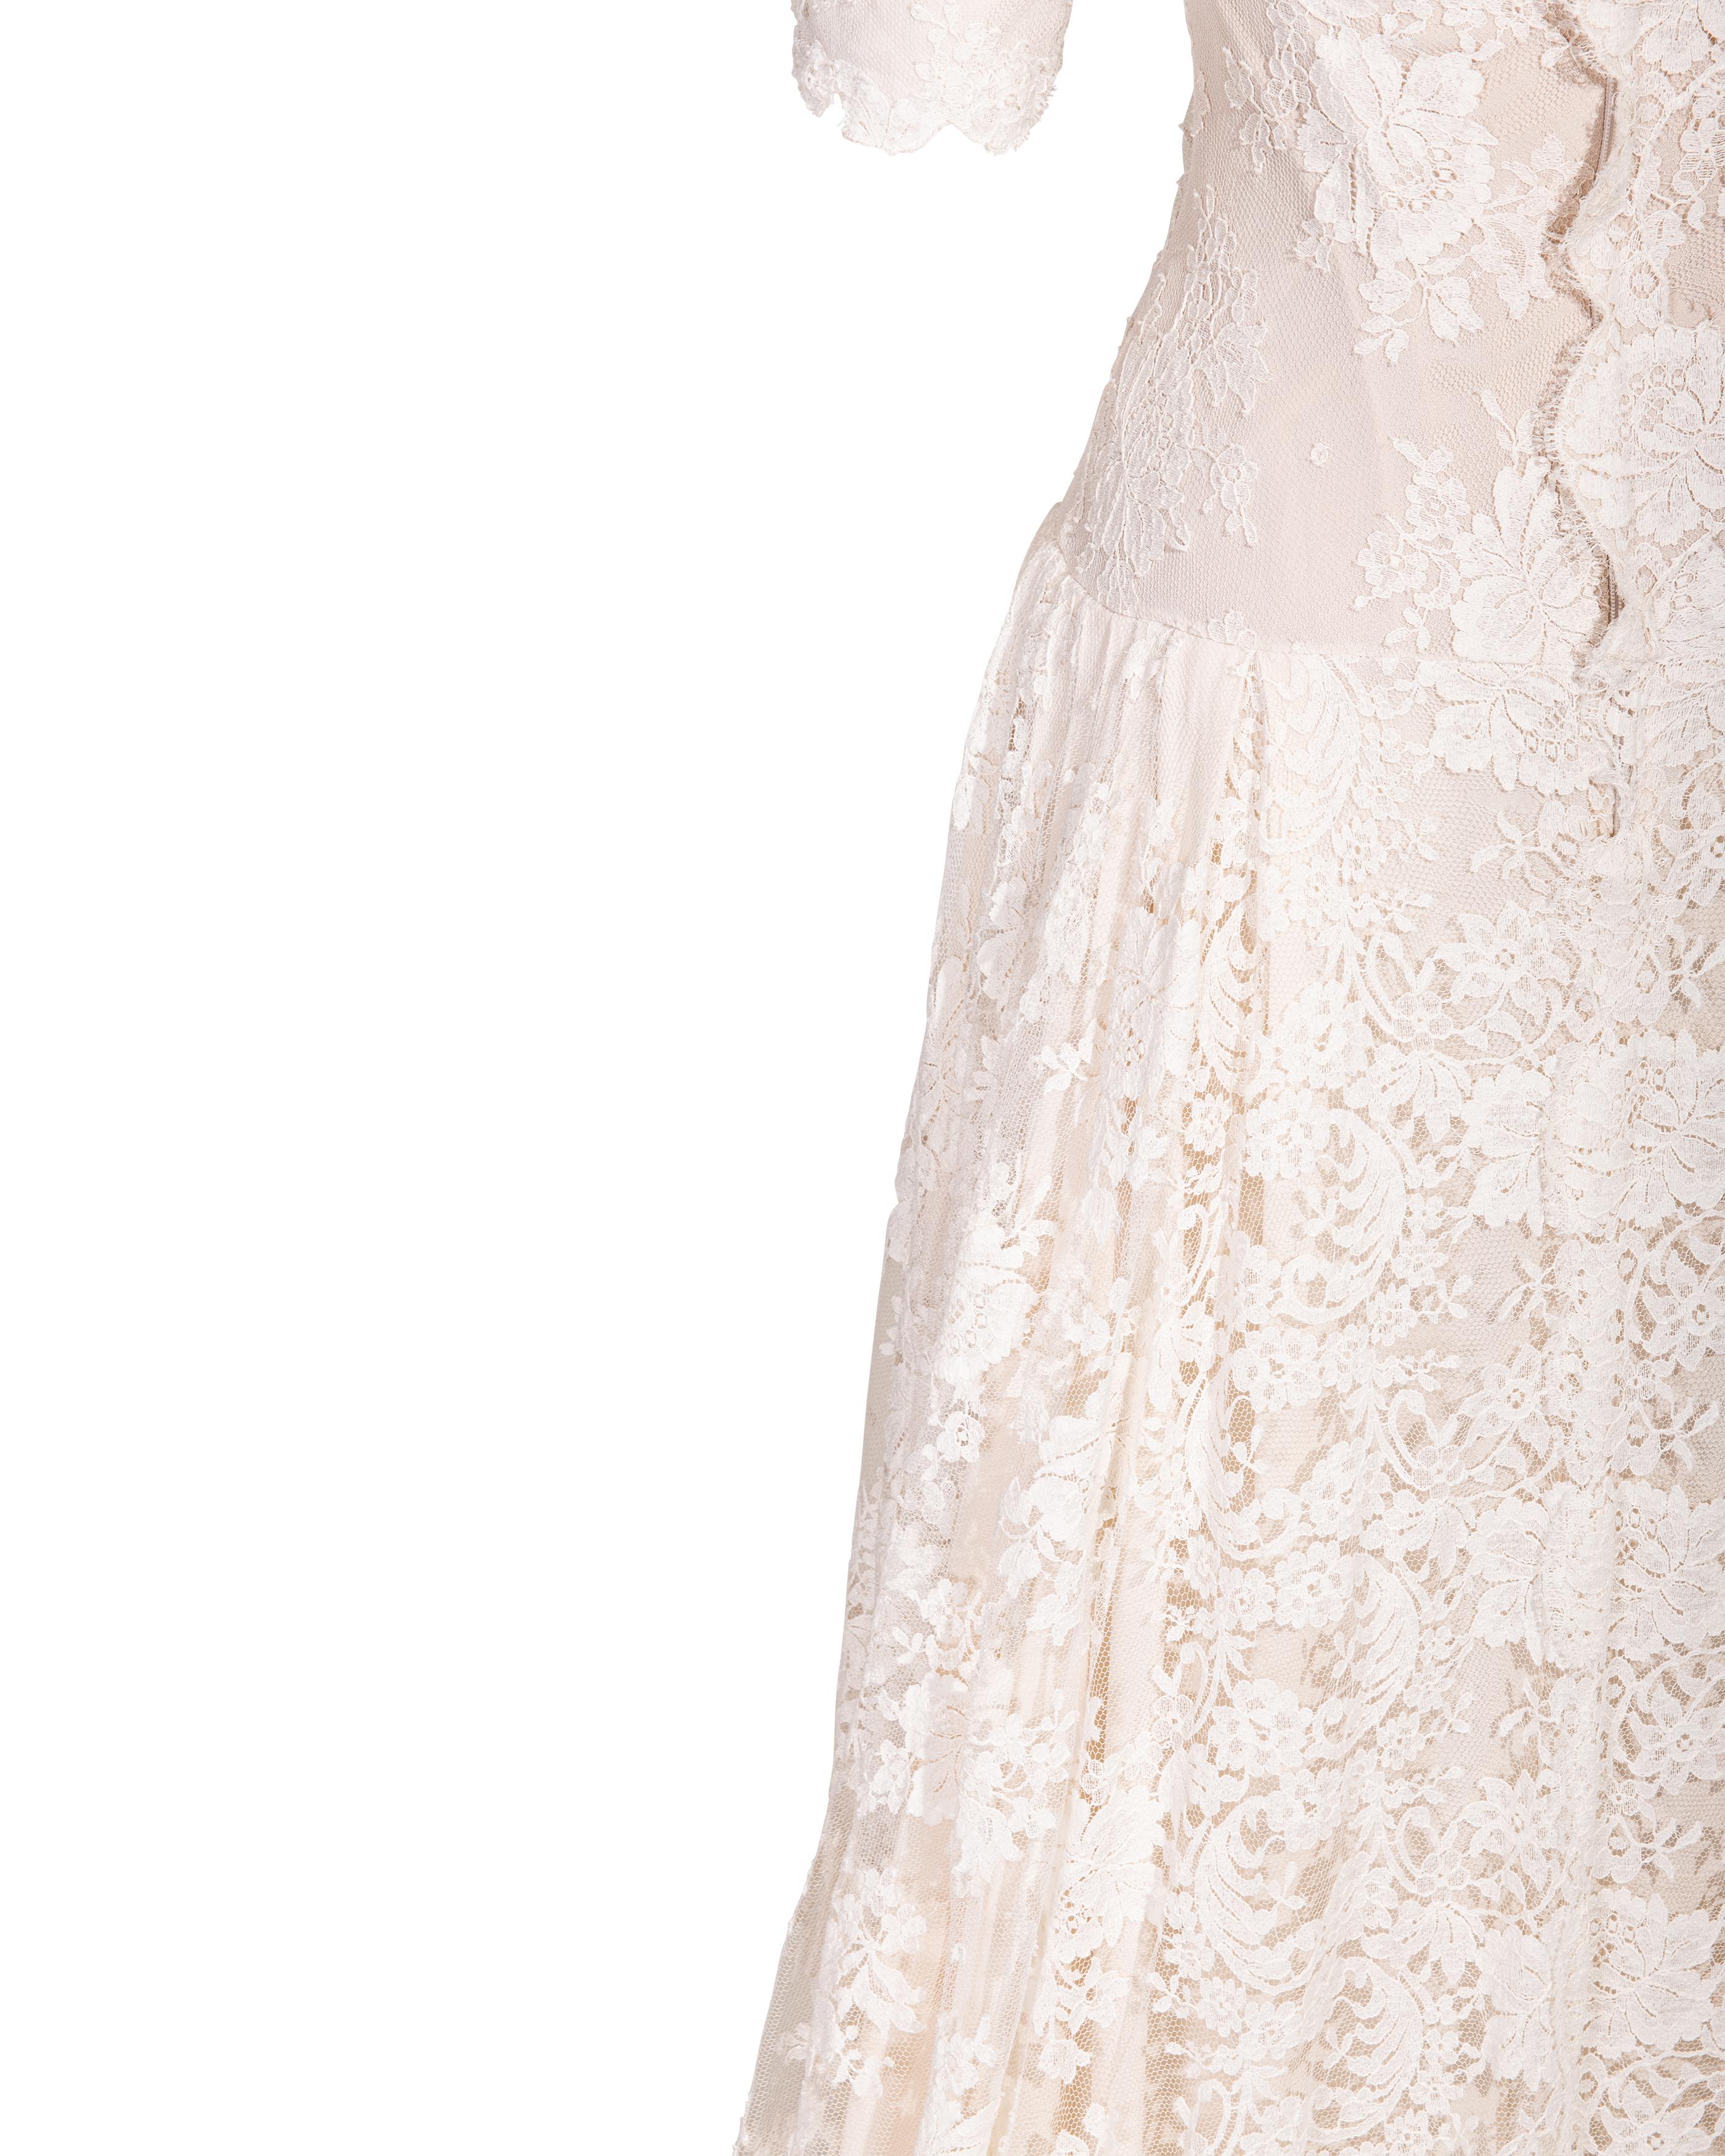 S/S 2007 Alexander McQueen (Lifetime) White Lace Off-Shoulder Gown with Train For Sale 2